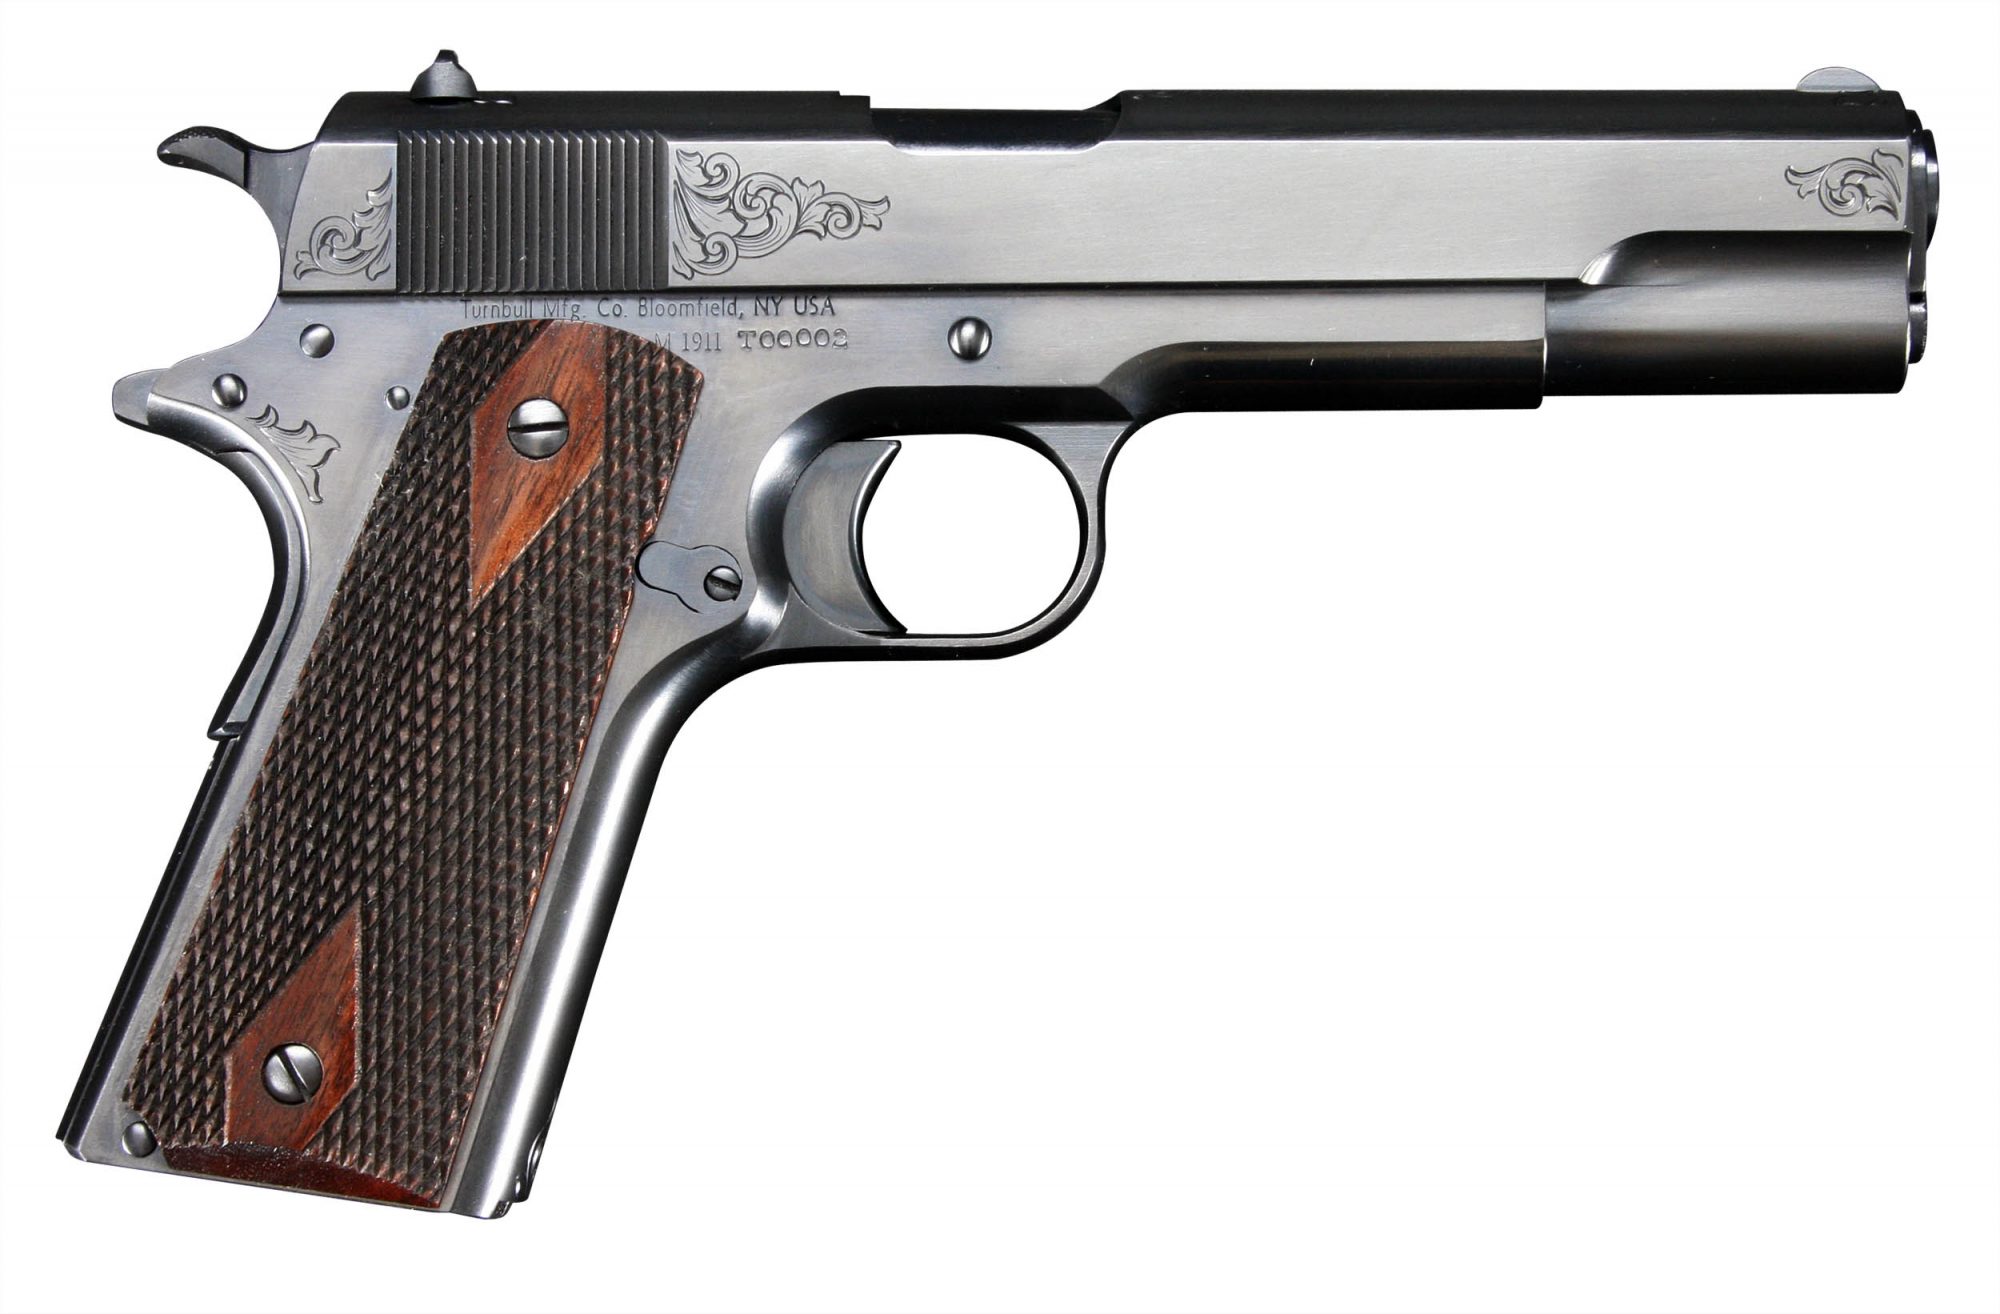 Turnbull Model 1911 WWI with A Coverage Engraving - PAST PRODUCT - No  Longer for Sale - Turnbull Restoration